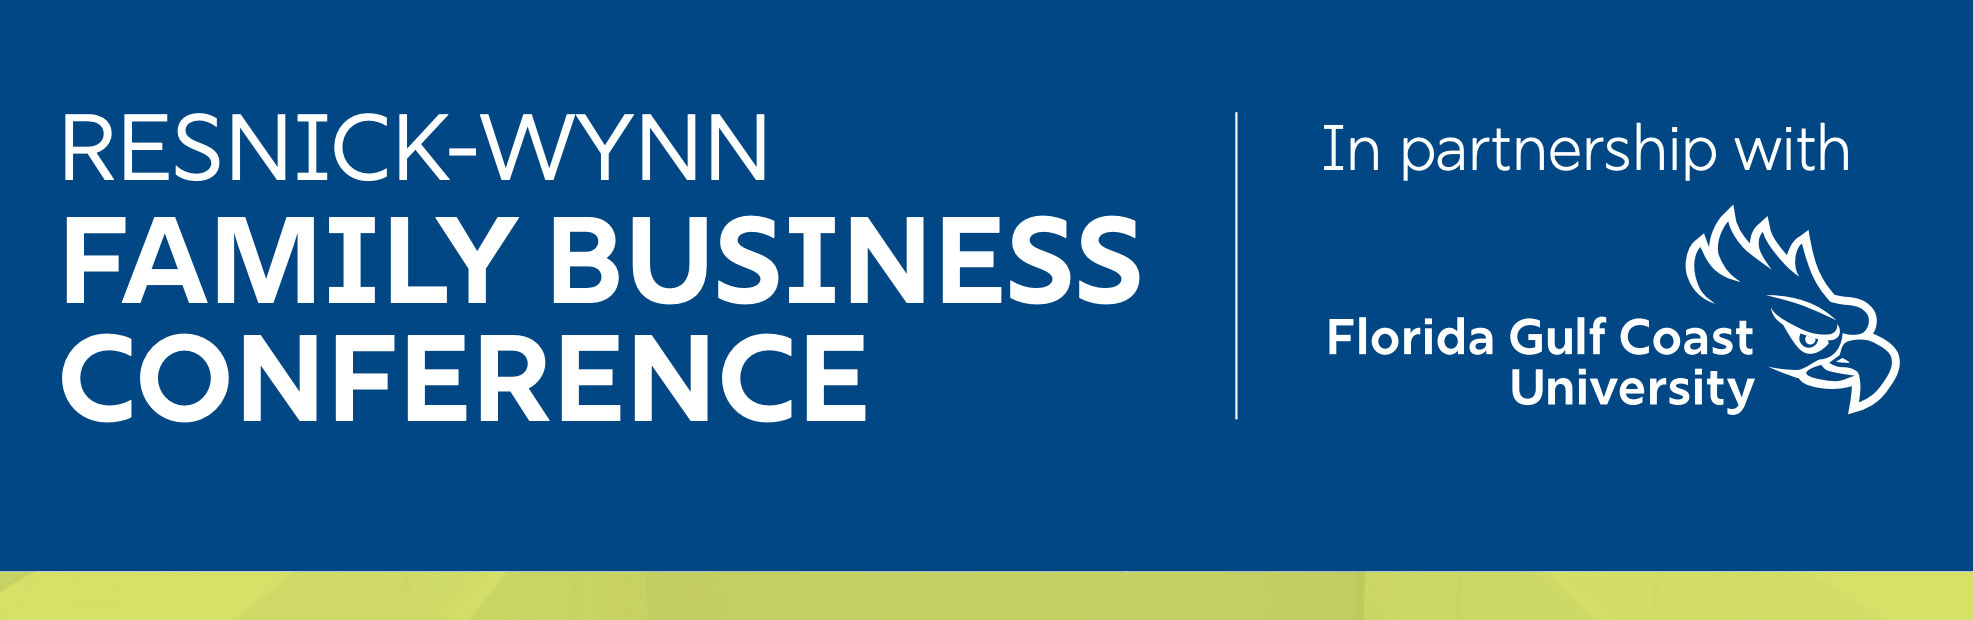 Resnick-Wynn family Business Conference In Partnership with Florida Gulf Coast University